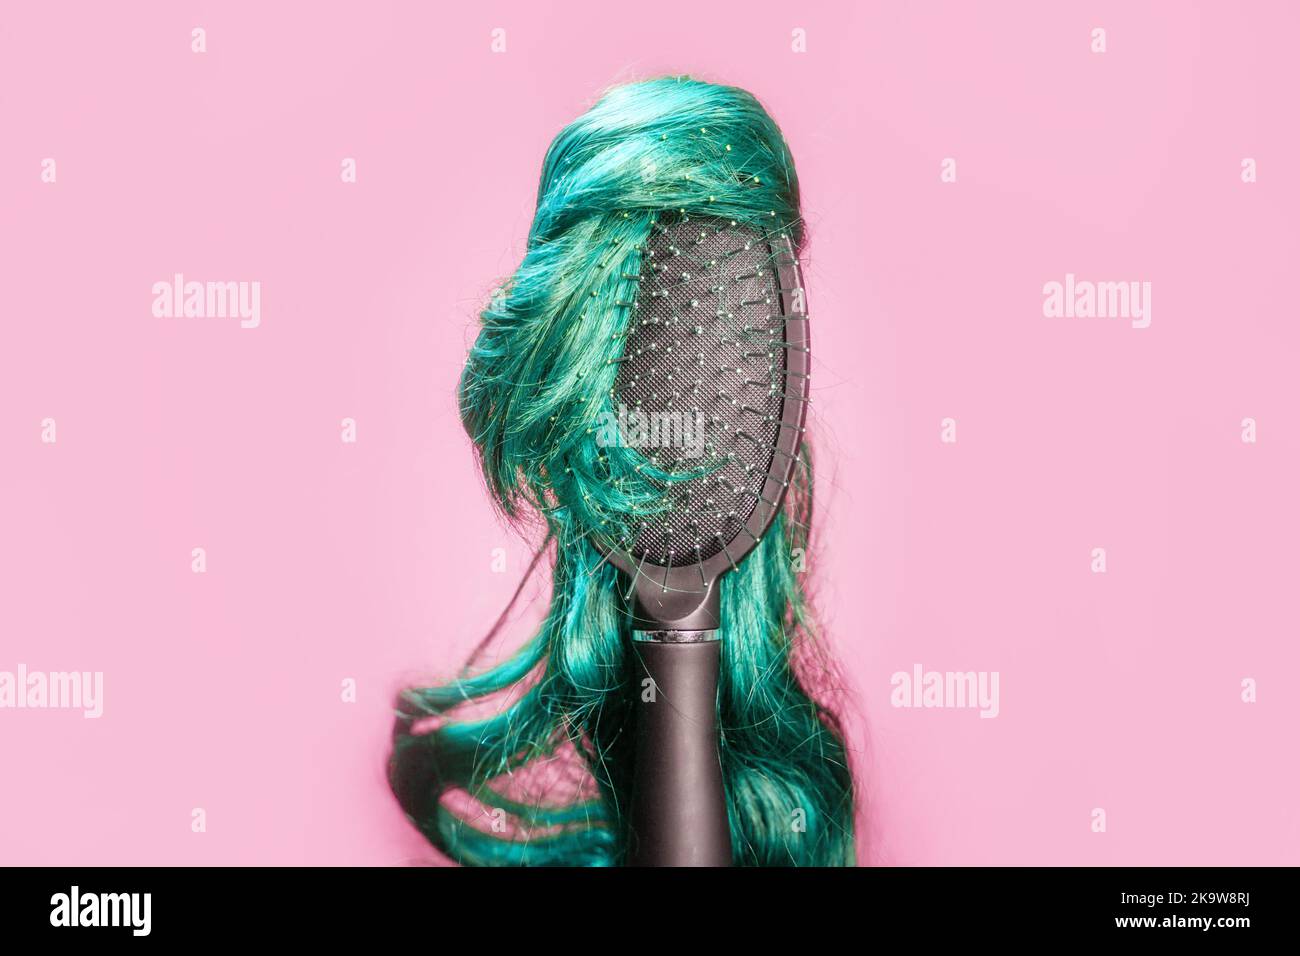 Hair coloring and dye. Comb with turquoise wig on pink background, like woman's head. Hairstyle and beauty salon. Copy space. Concept of hair care, ba Stock Photo